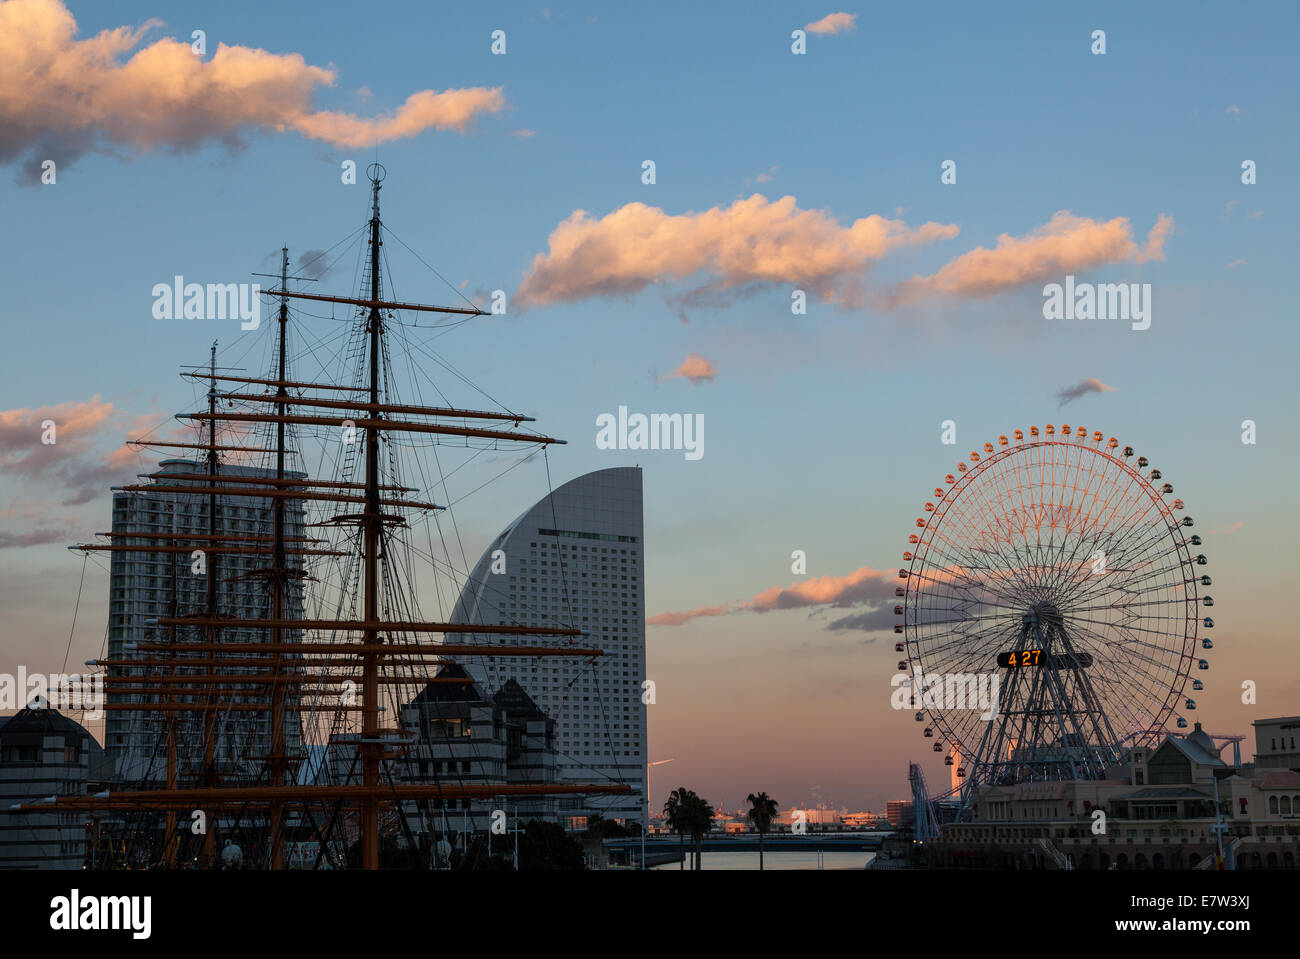 Yokohama skyline at sunset with the Grand Inter-Continental hotel in the centre and Cosmo Clock ferris wheel to the right. Japan Stock Photo